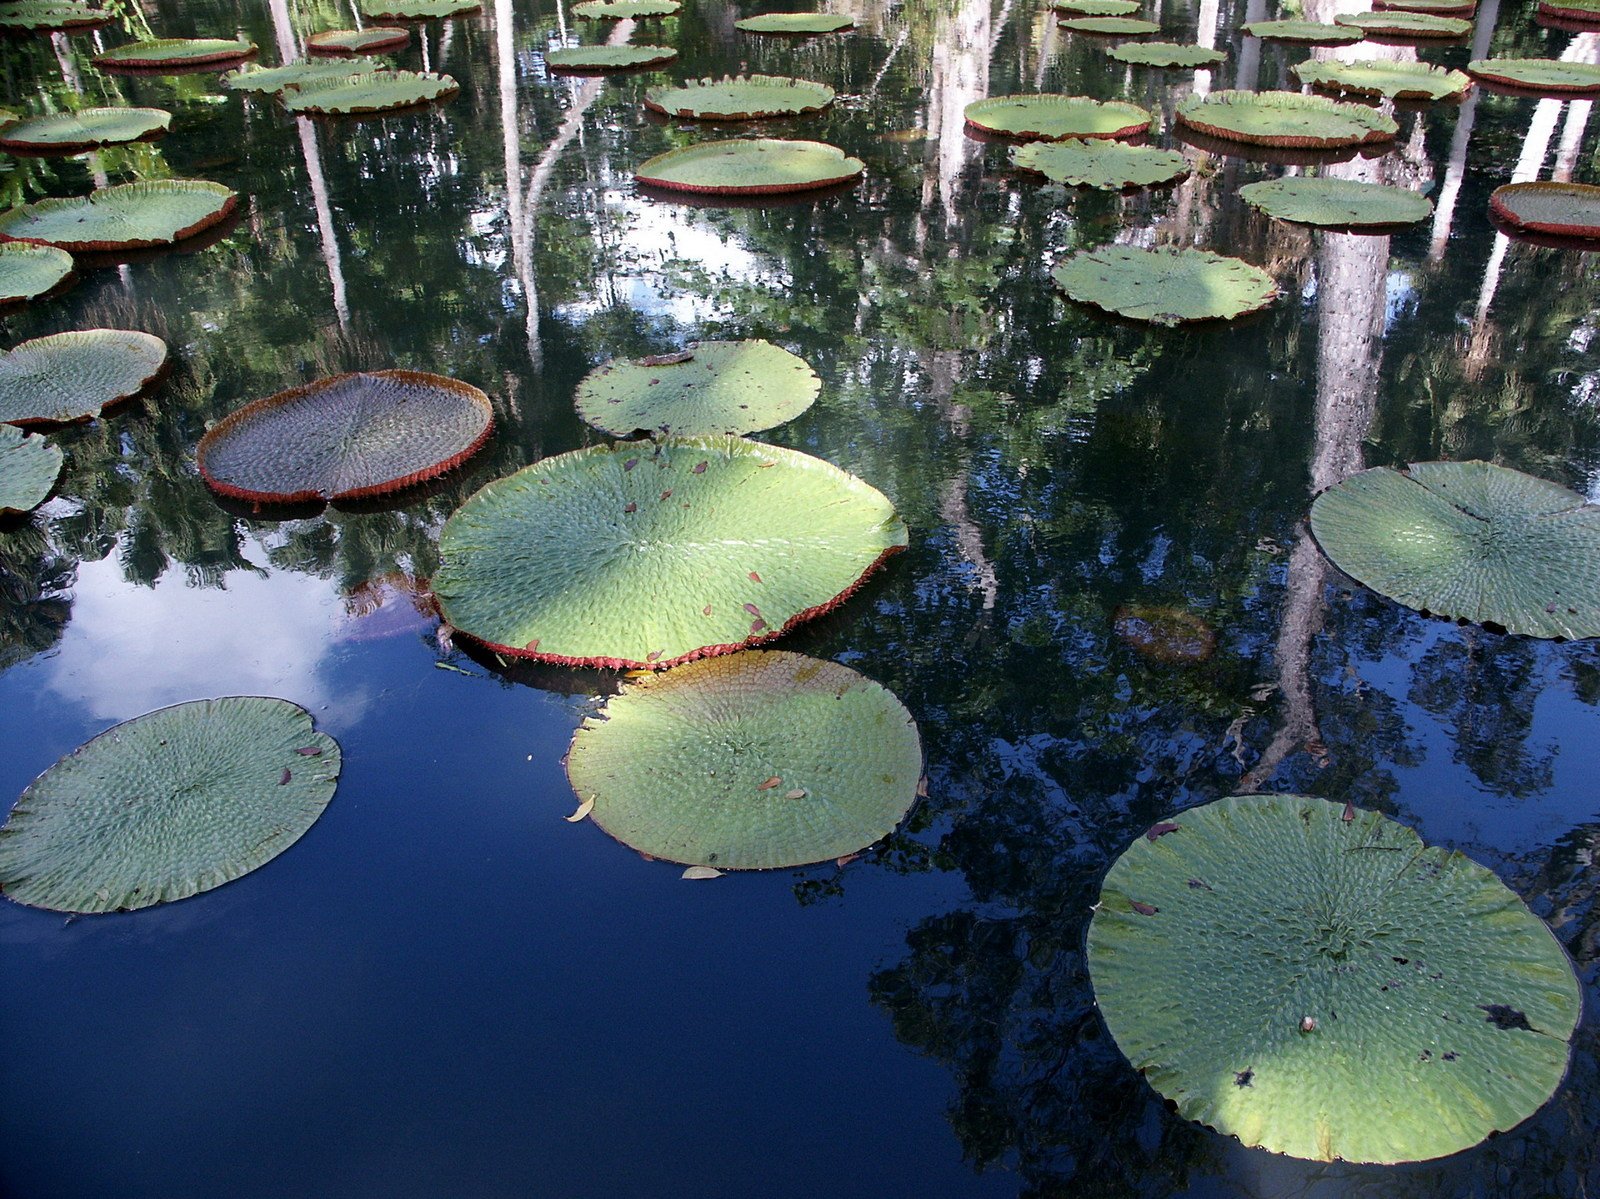 the view from above, there are lots of lily pad in the water